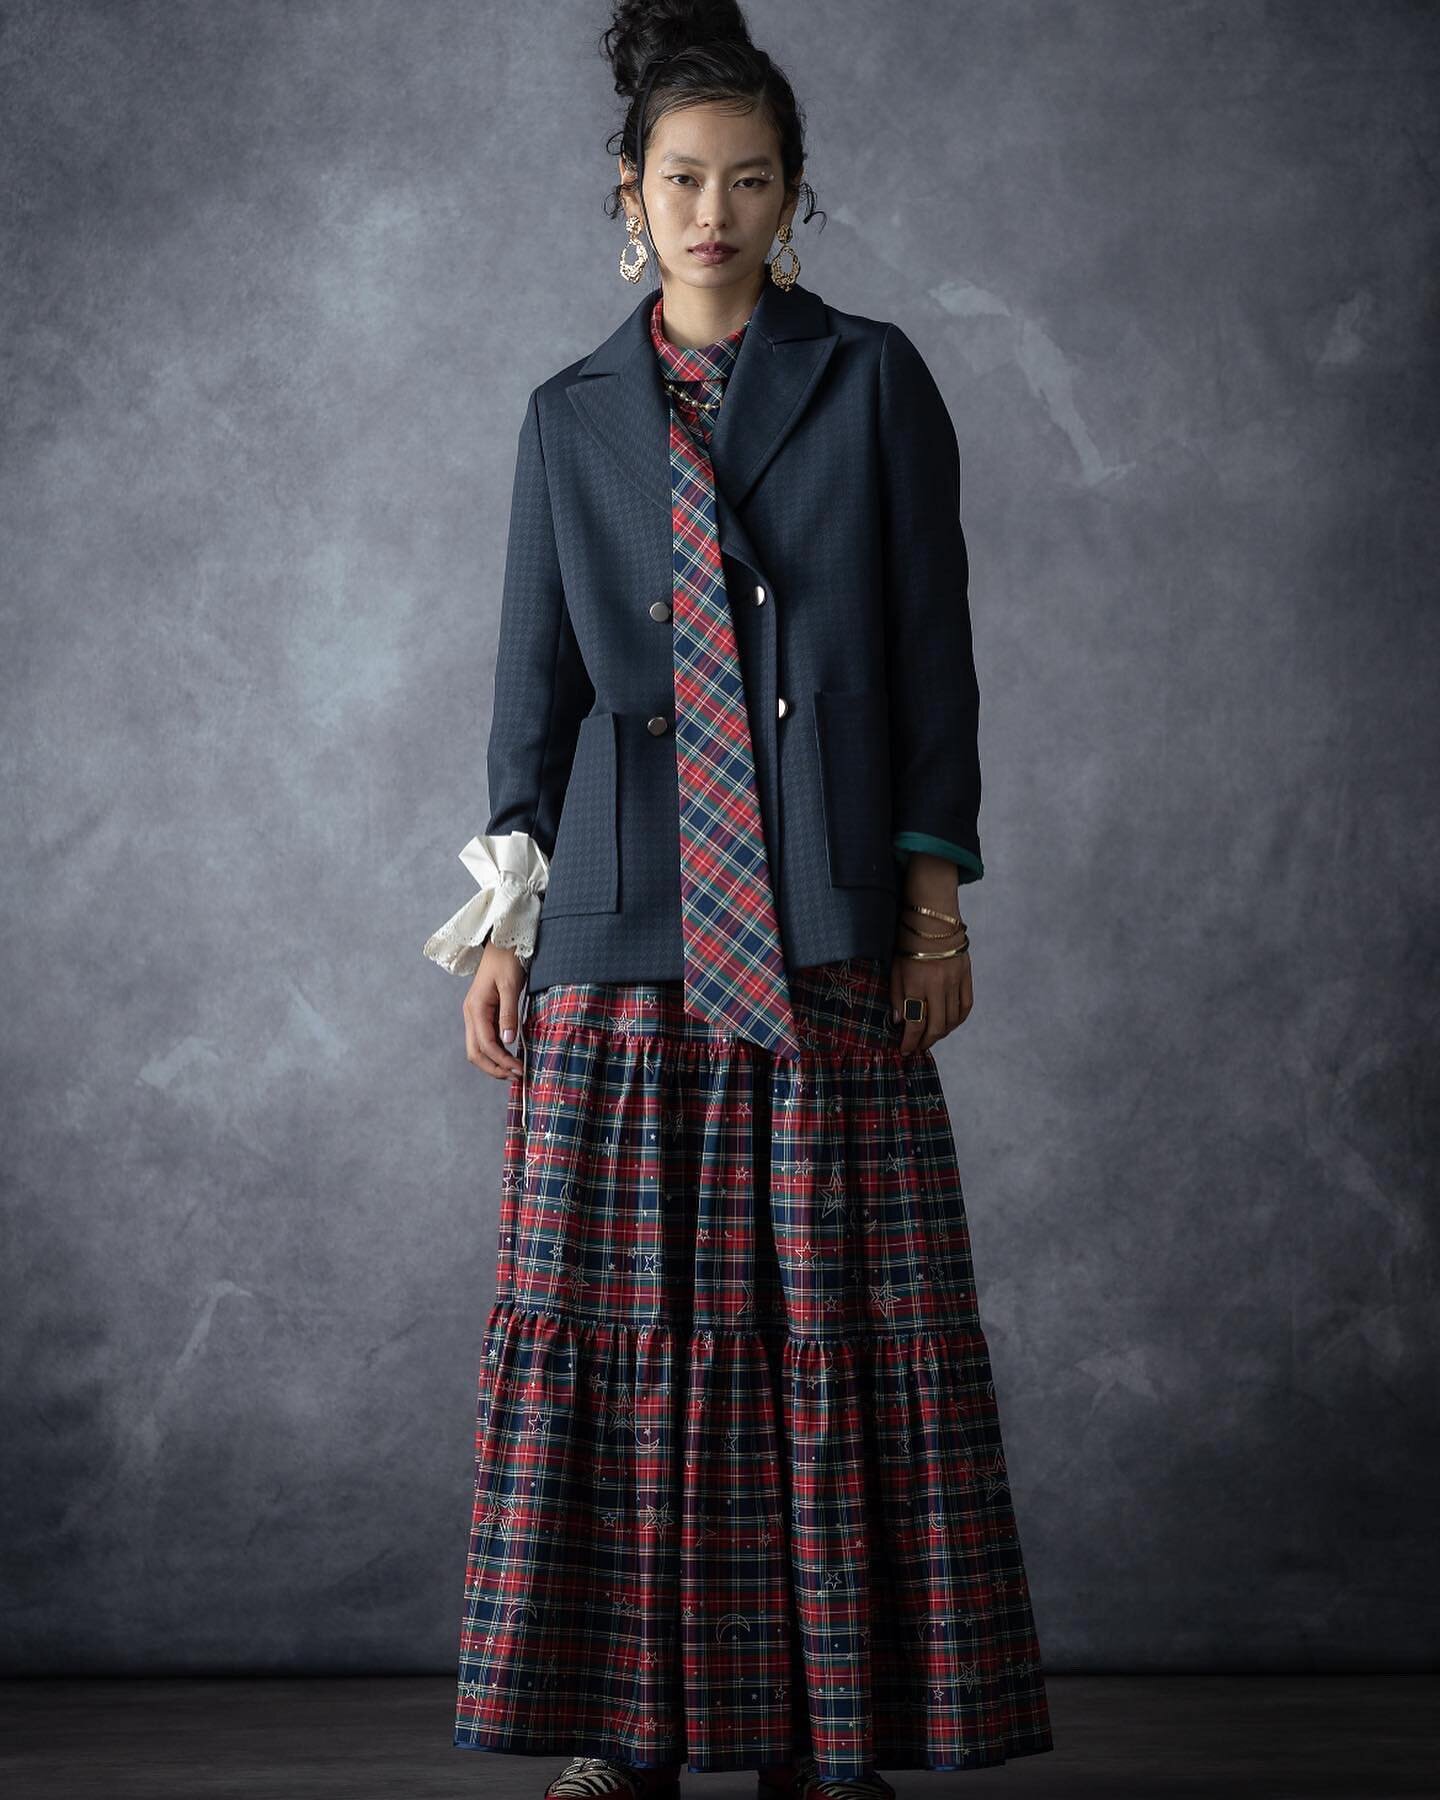 Wataru Nakazono reworks traditional silhouettes with incomparable new textiles. He proves his outstanding craftsmanship with his newest collection for the brand Chono. 
The brand is one of our favorites, besides the beautiful clothing, Chono seems to